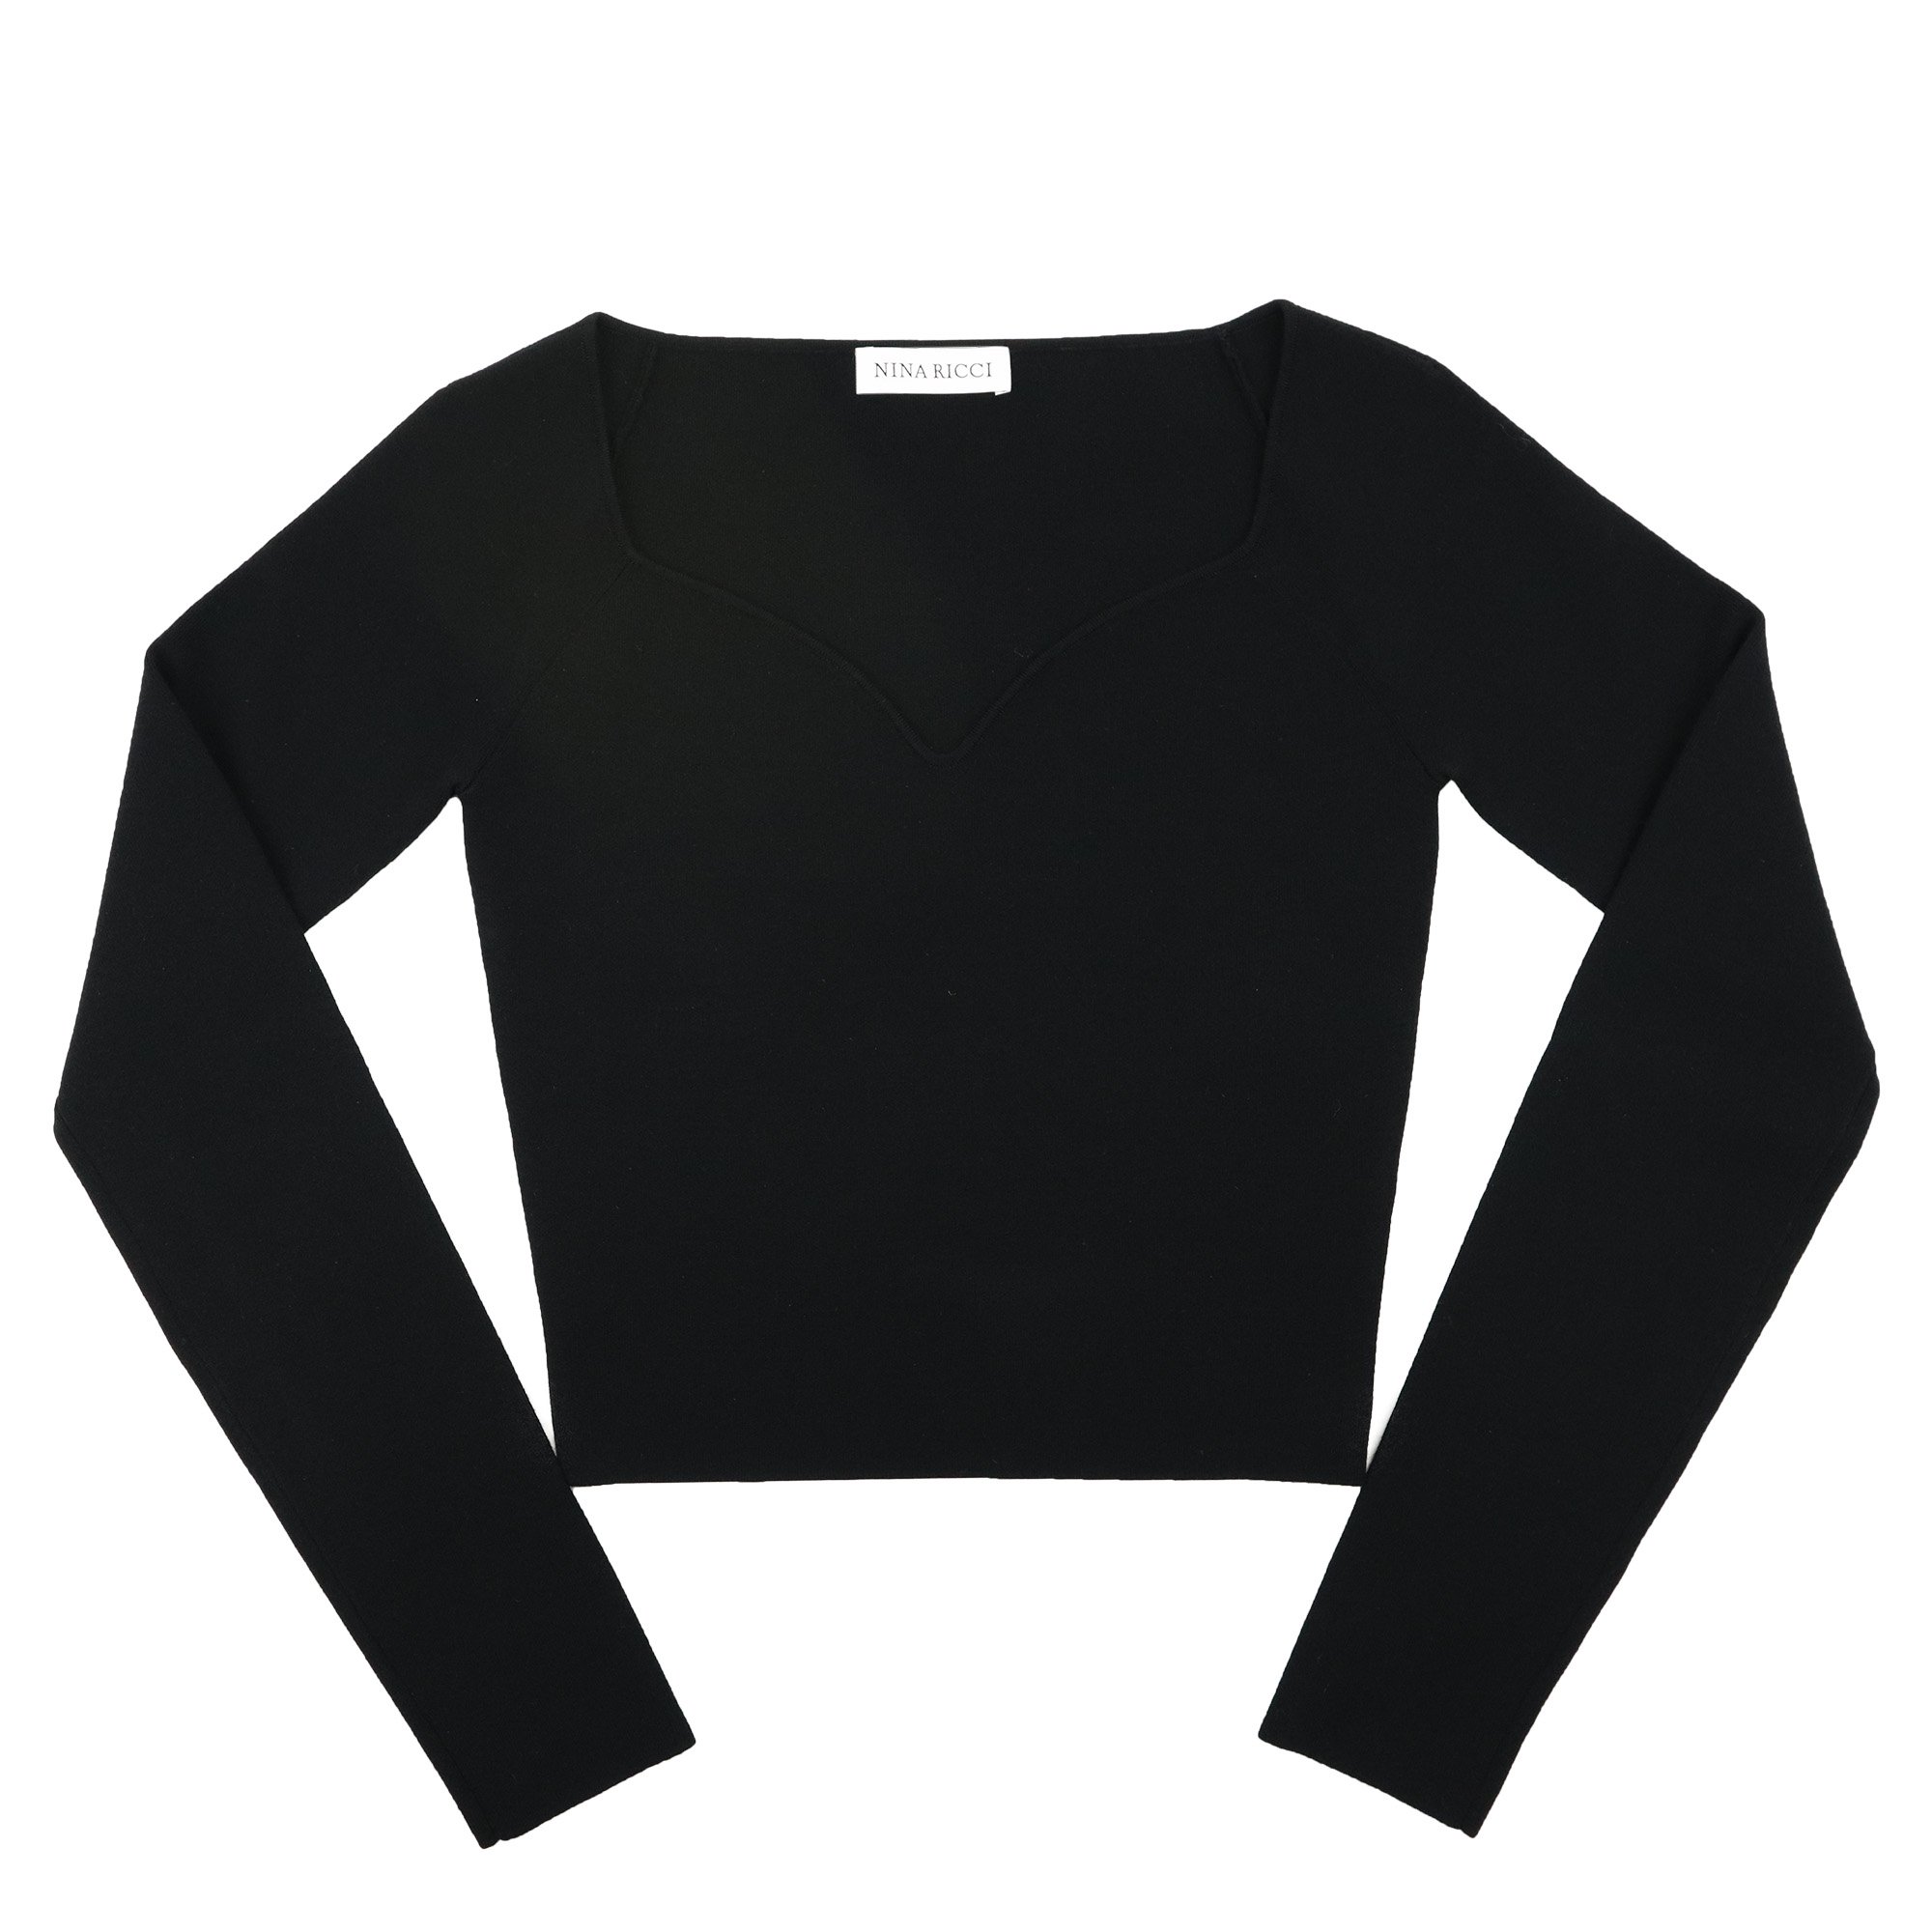 <img class='new_mark_img1' src='https://img.shop-pro.jp/img/new/icons47.gif' style='border:none;display:inline;margin:0px;padding:0px;width:auto;' />NINARICCI  V-NECK KNIT PULLOVER【BLACK】